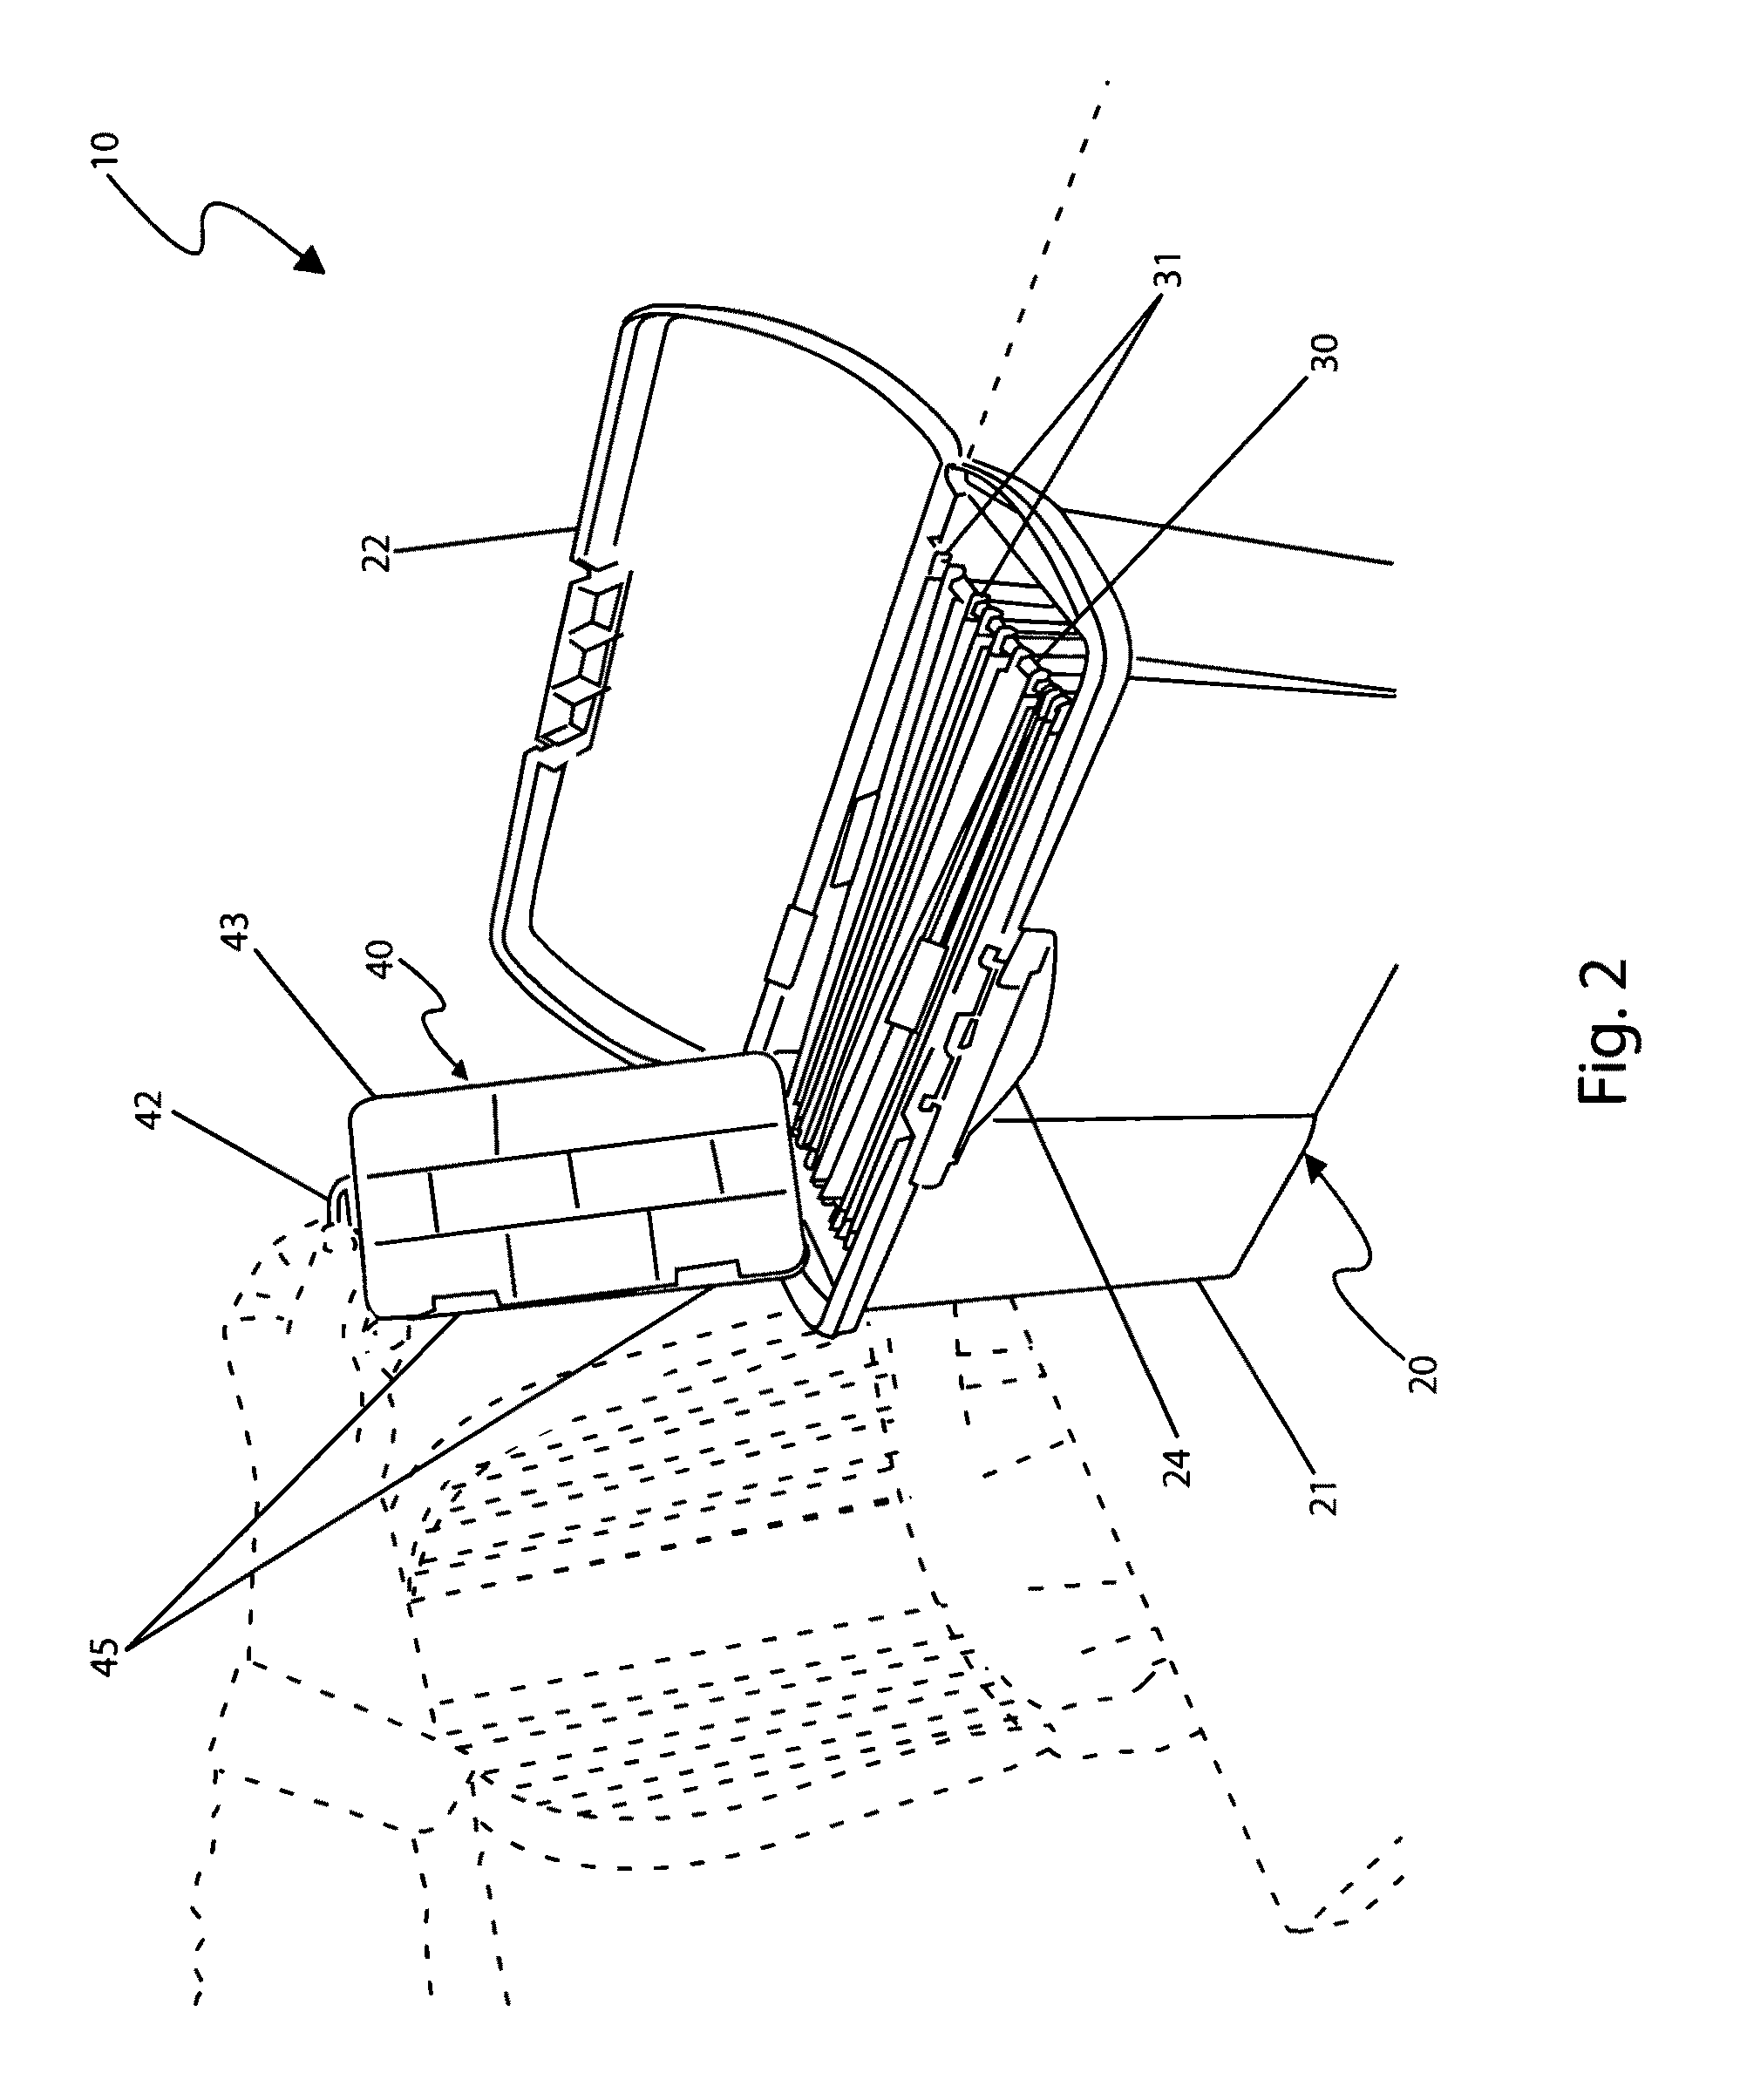 Fishing lure storage device and method of use thereof